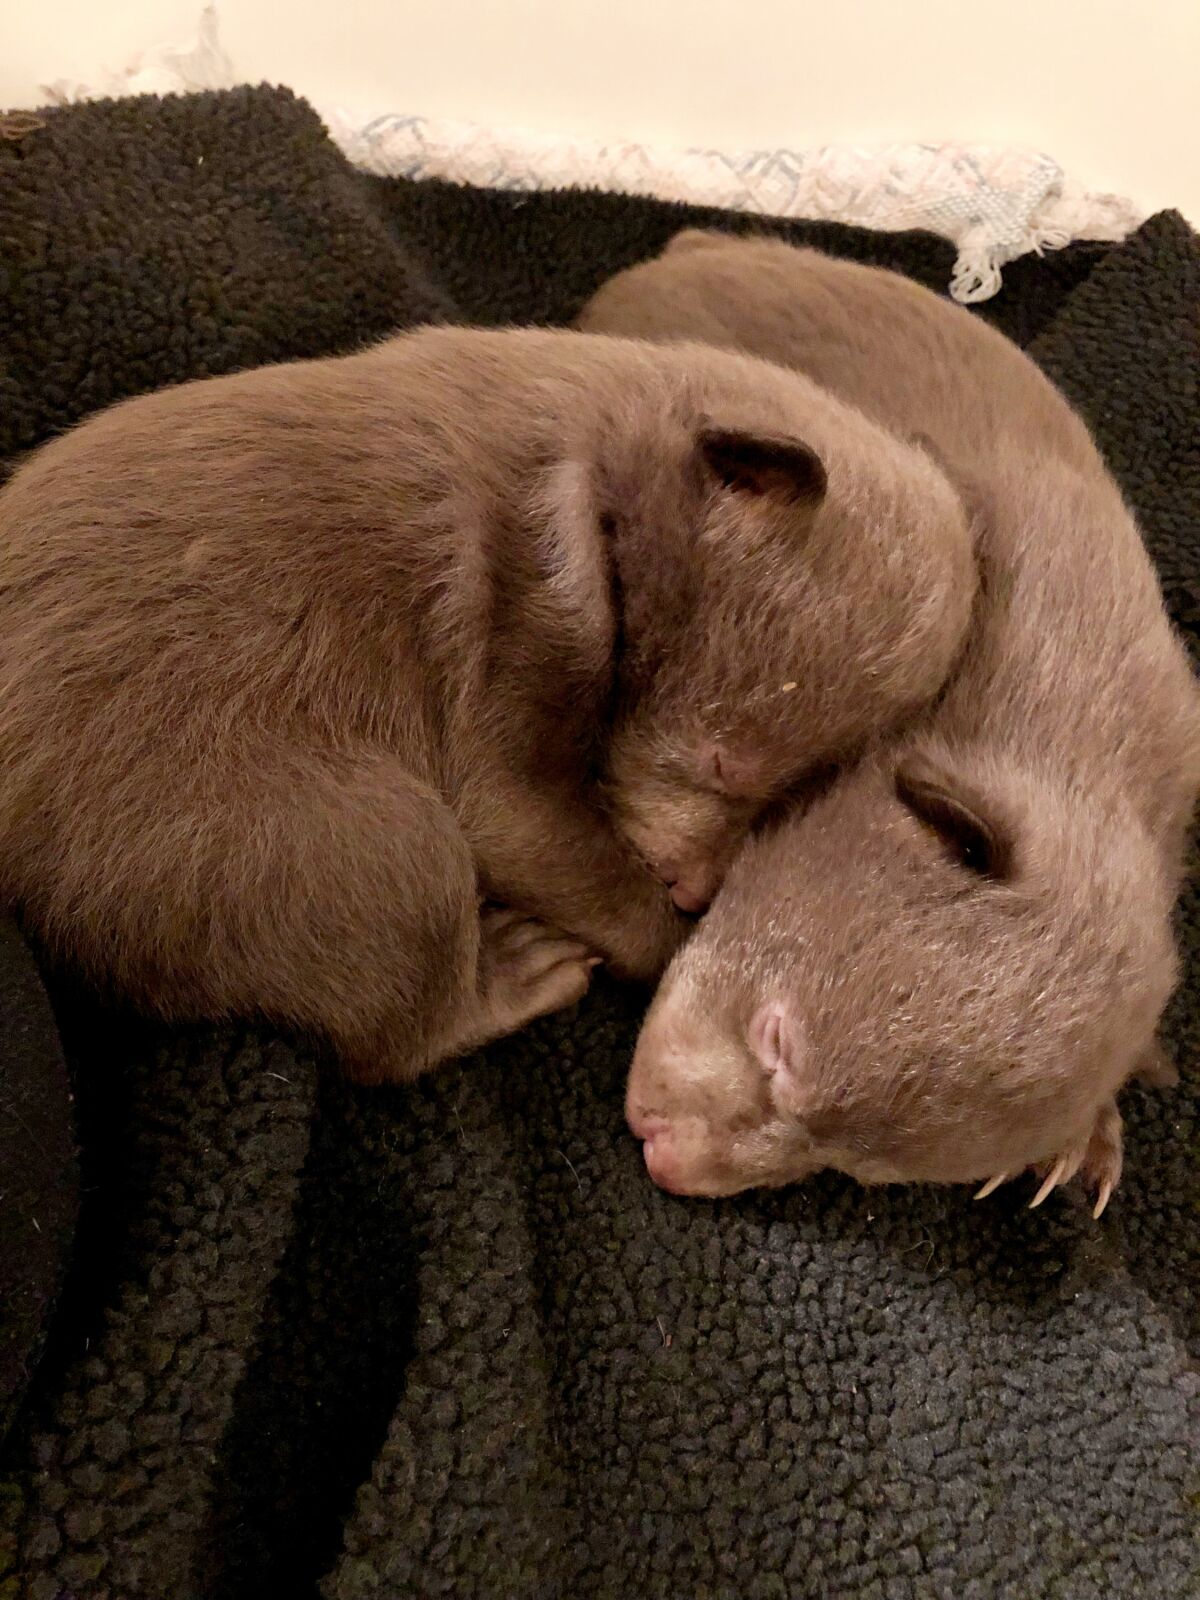 This undated photo provided by the California Department of Fish and Wildlife shows two rescued bear cubs. California wildlife officials say a Northern California man who admitted to taking the two bear cubs from their den in 2019 and notified officials after he was unable to care for them pleaded guilty in November 2021 to possession of a prohibited species. The department published the story Tuesday, March 15, 2022, on its blog about bears to encourage anyone who may witness wildlife poaching to contact authorities. (California Department of Fish and Wildlife (CDFW) via AP)